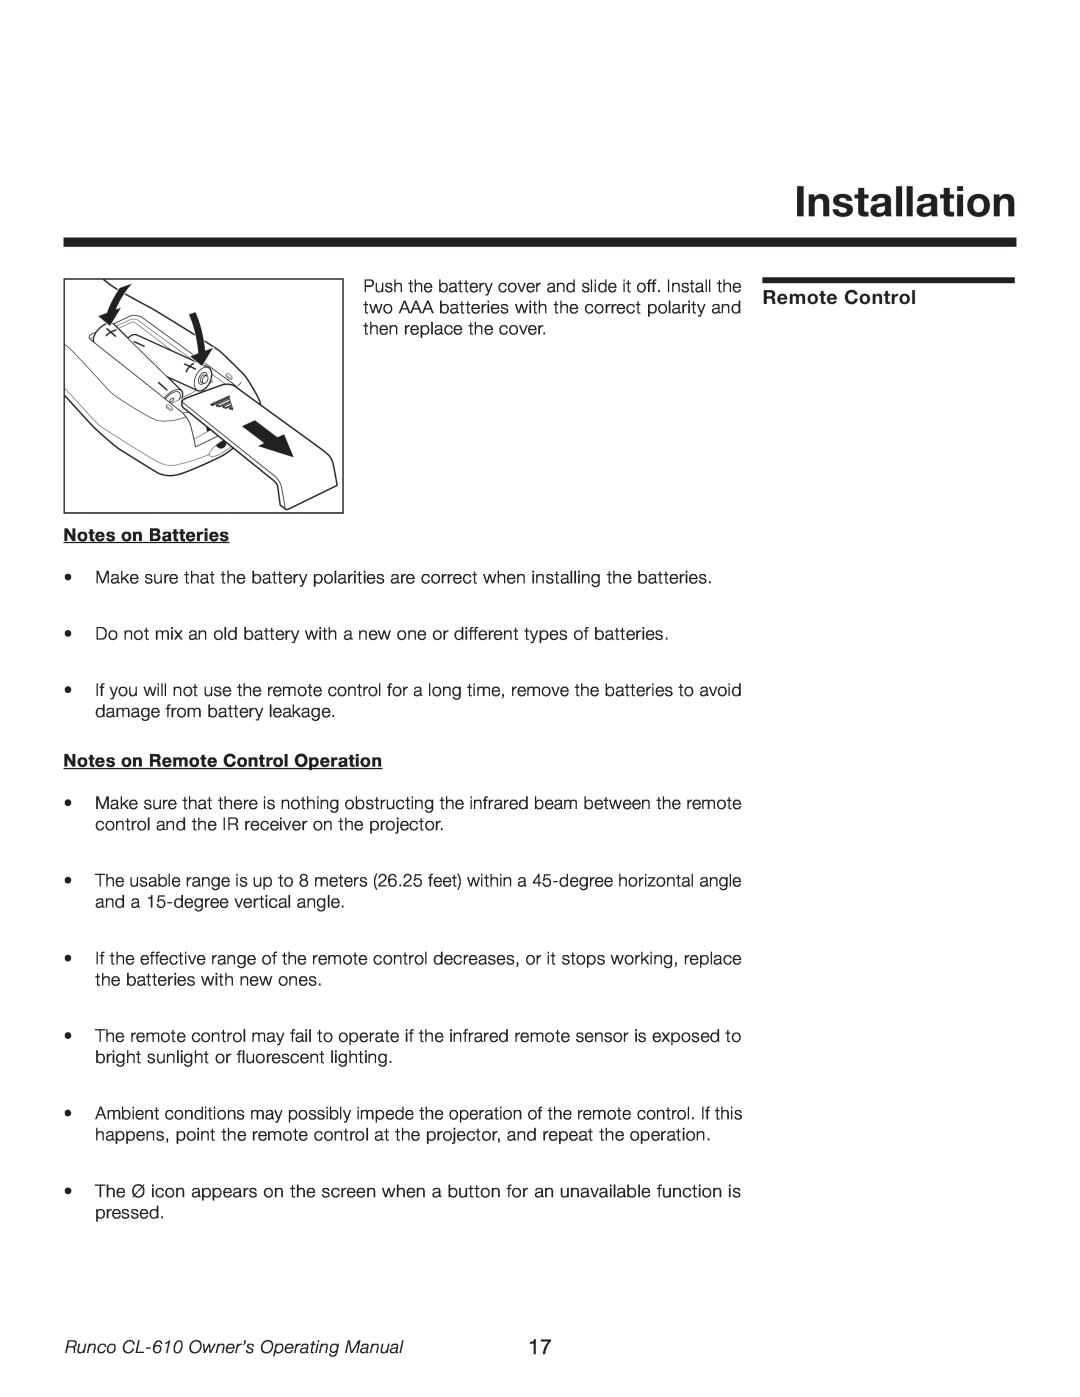 Runco CL-610LT manual Installation, Notes on Batteries, Notes on Remote Control Operation 